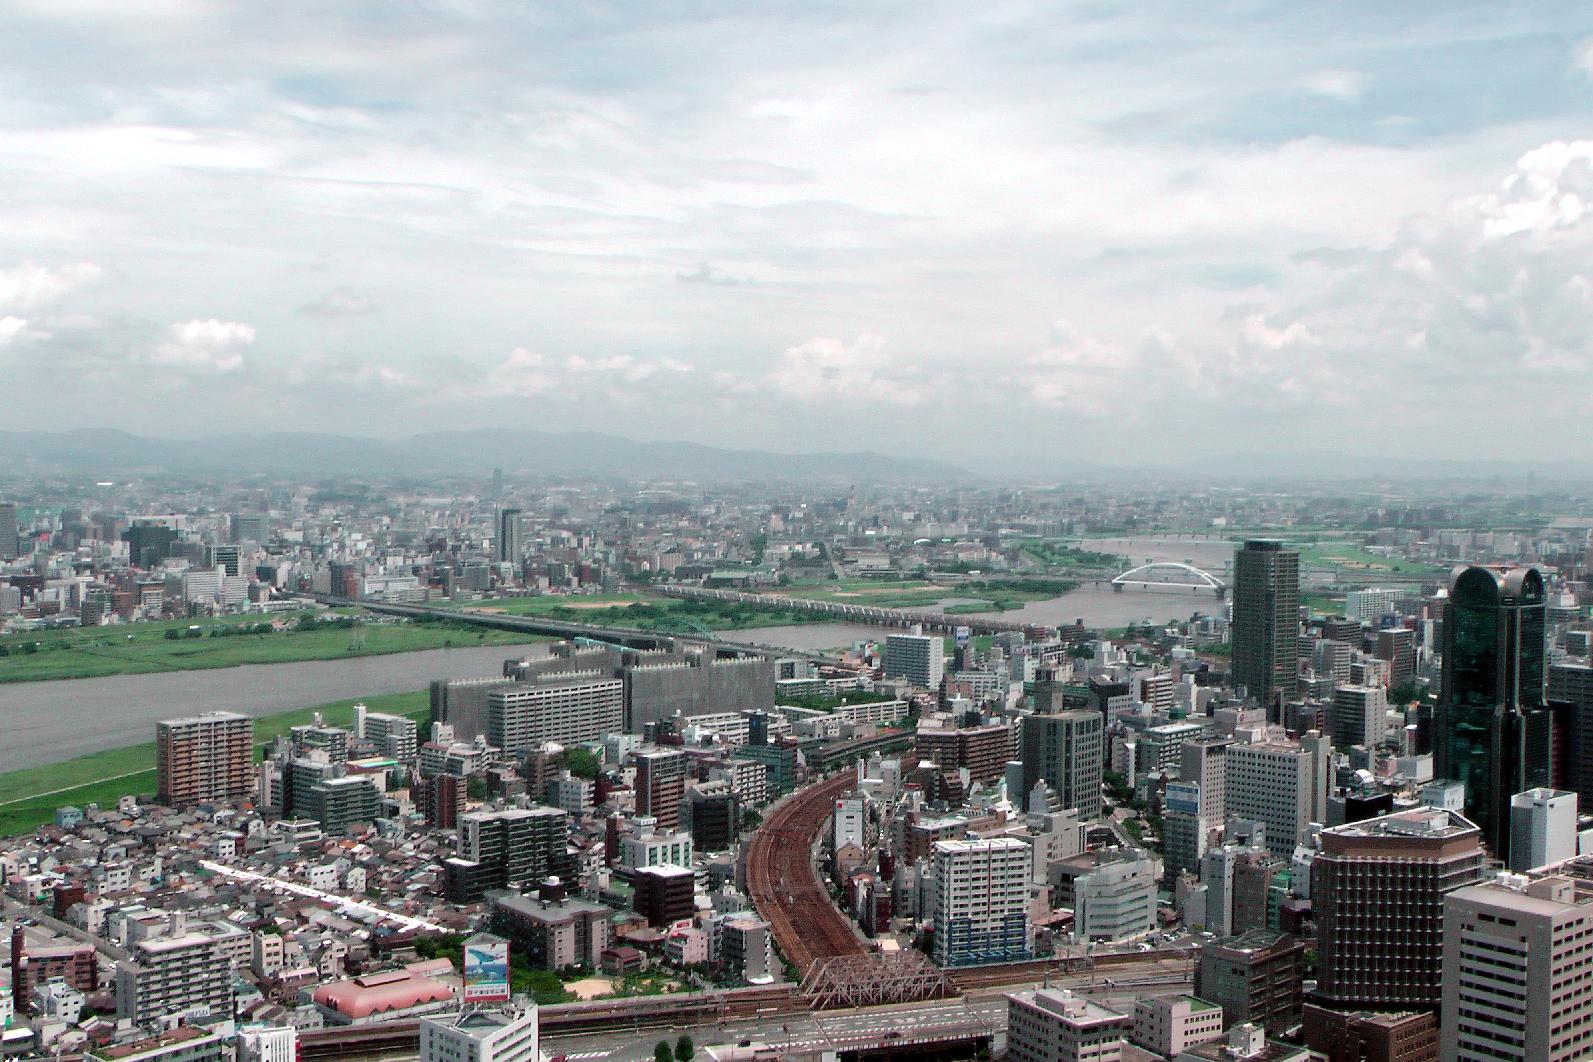 Osaka's city centre. View in direction to Kyoto (north)